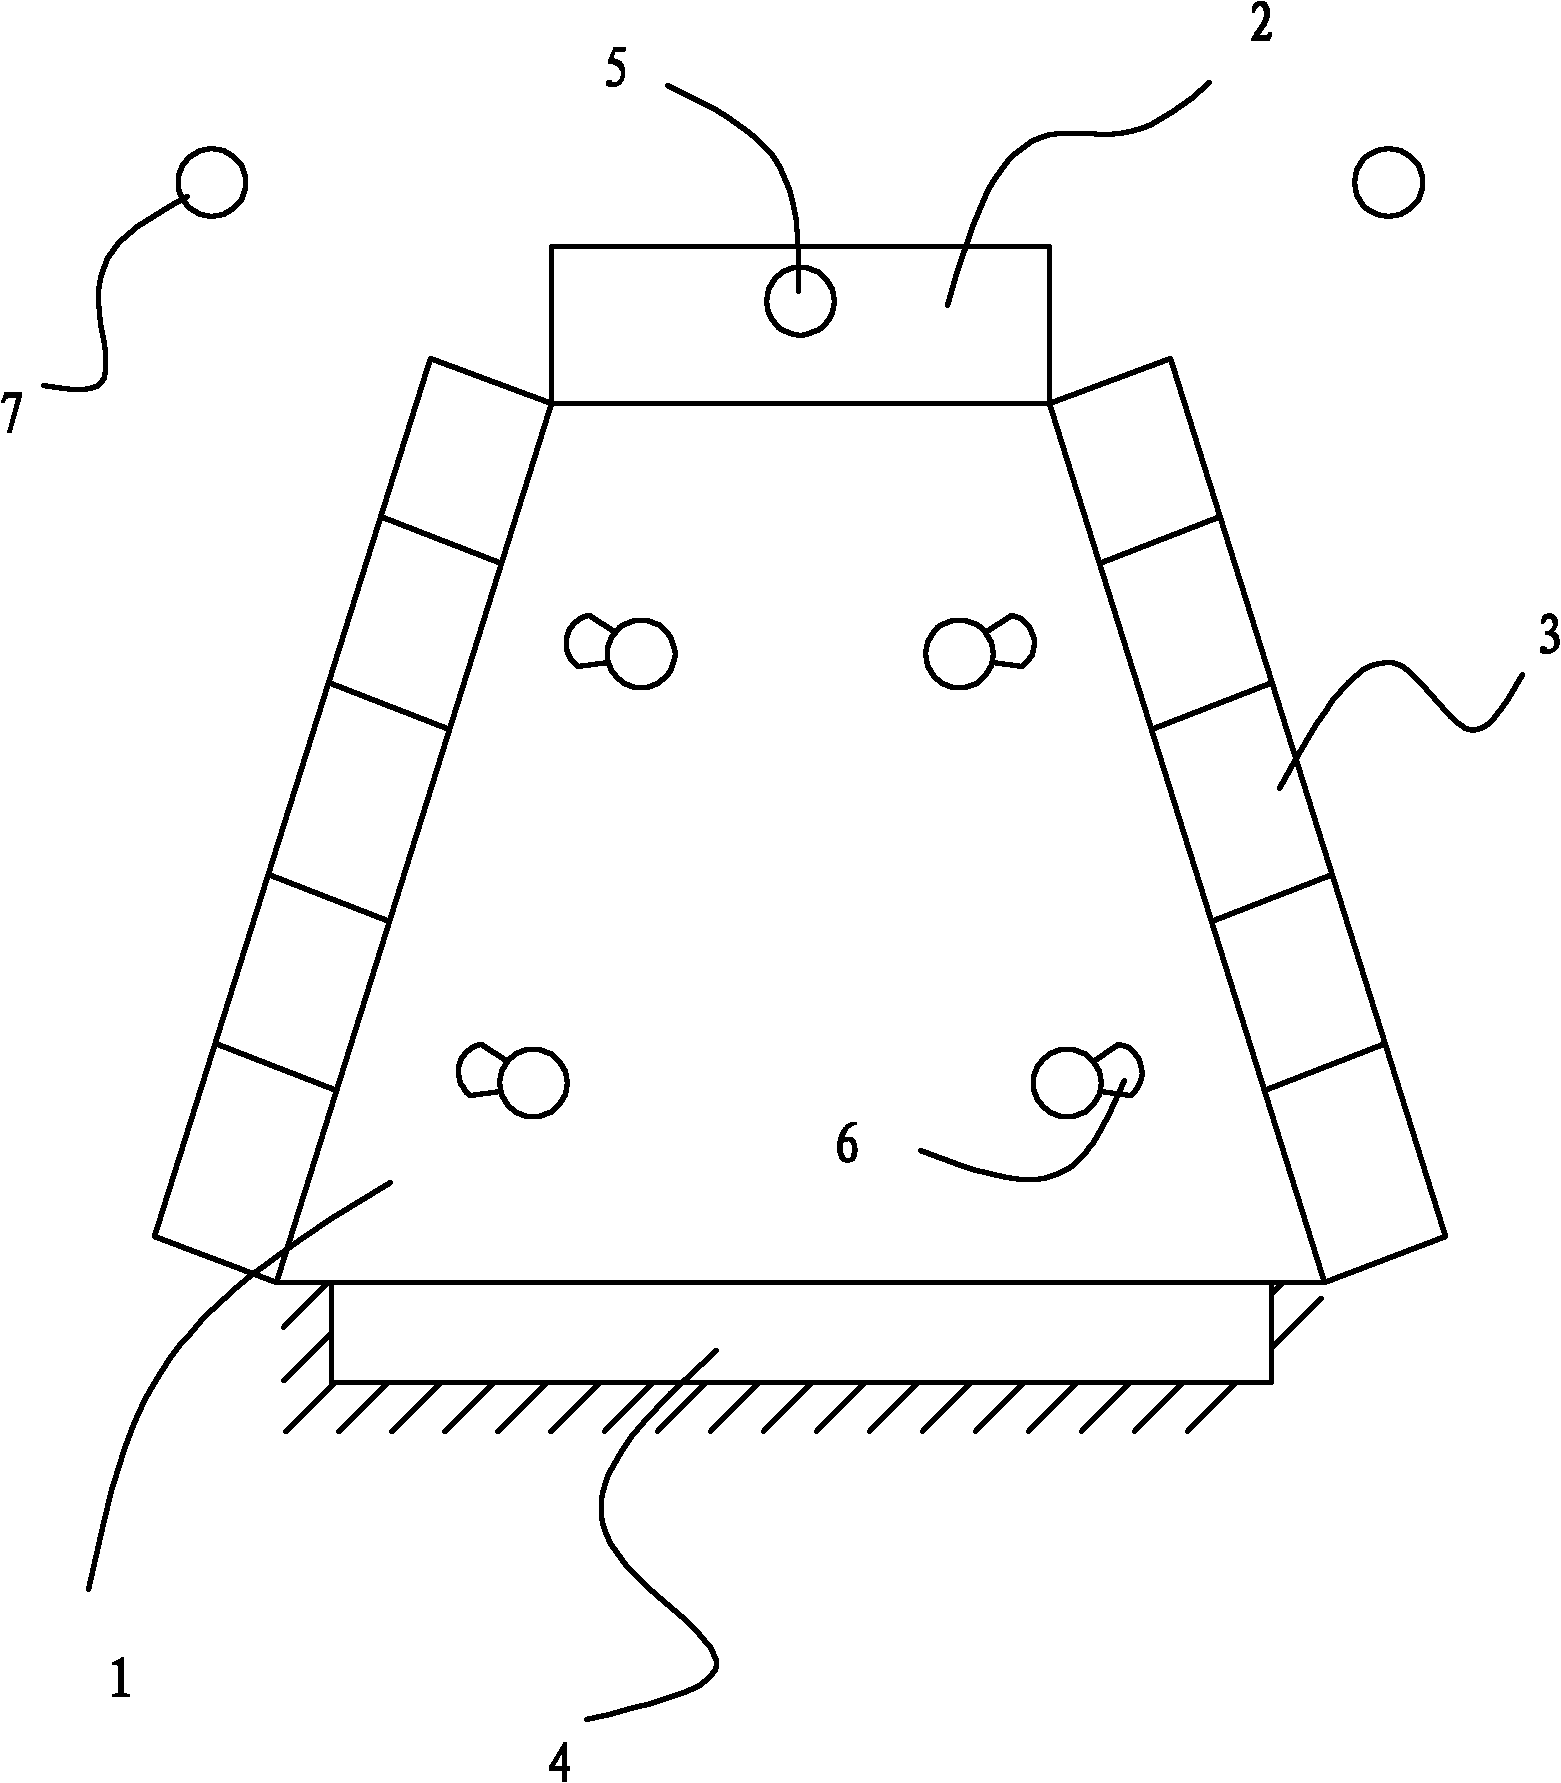 Strawberry cultivating device and method